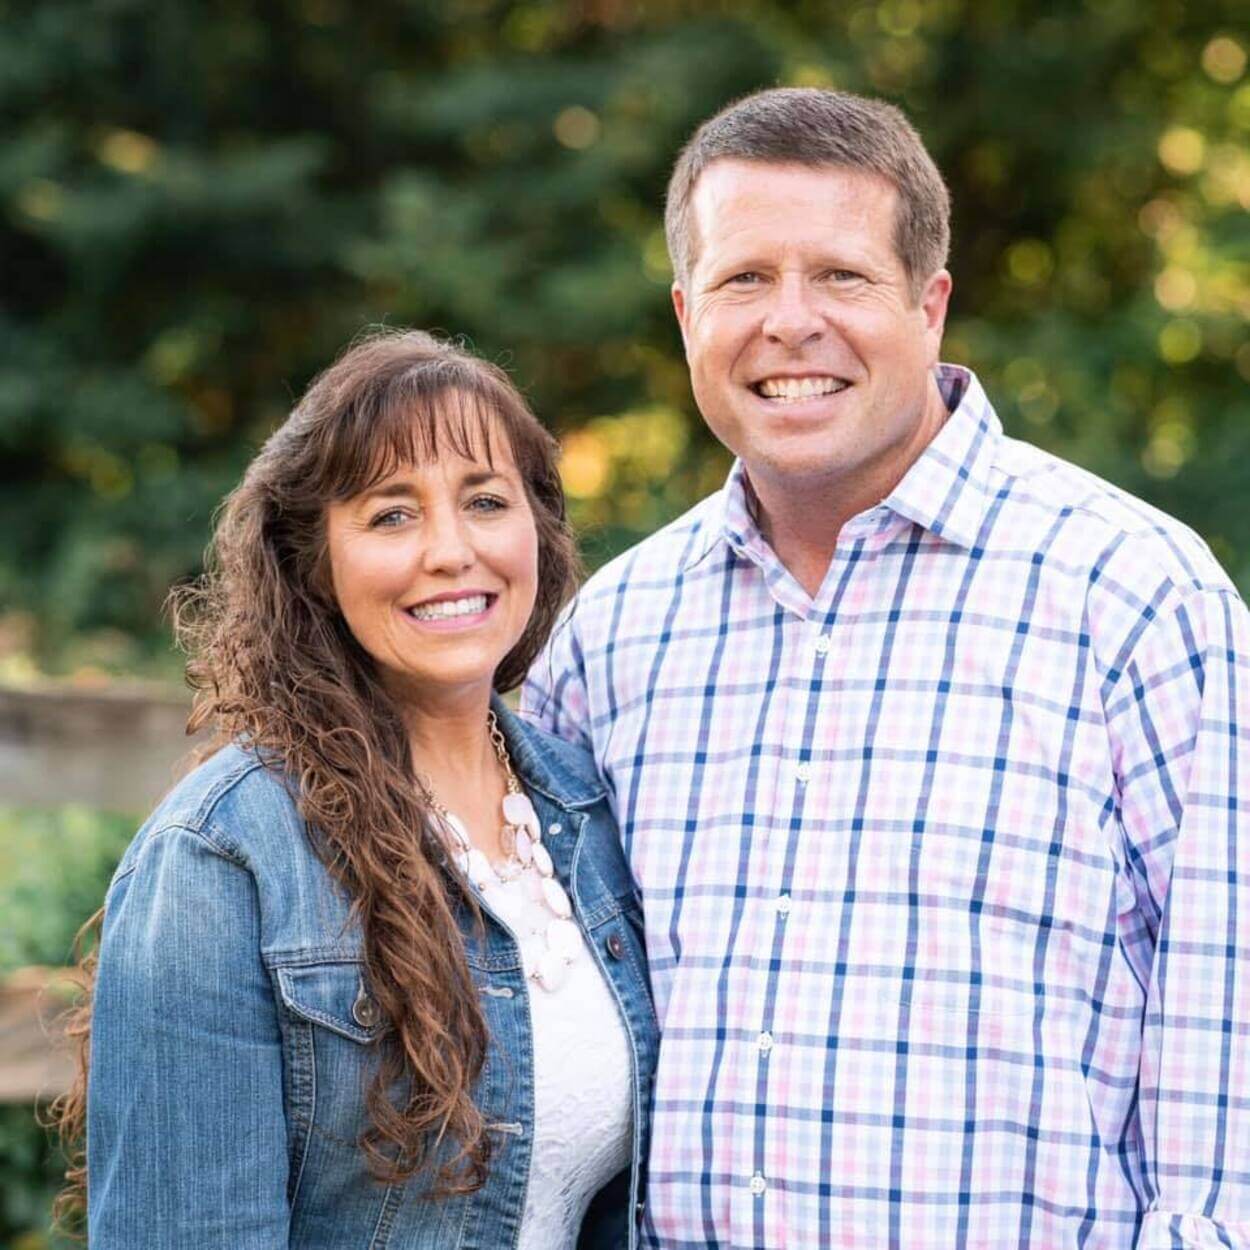 19 Kids and Counting: Duggar Family’s House